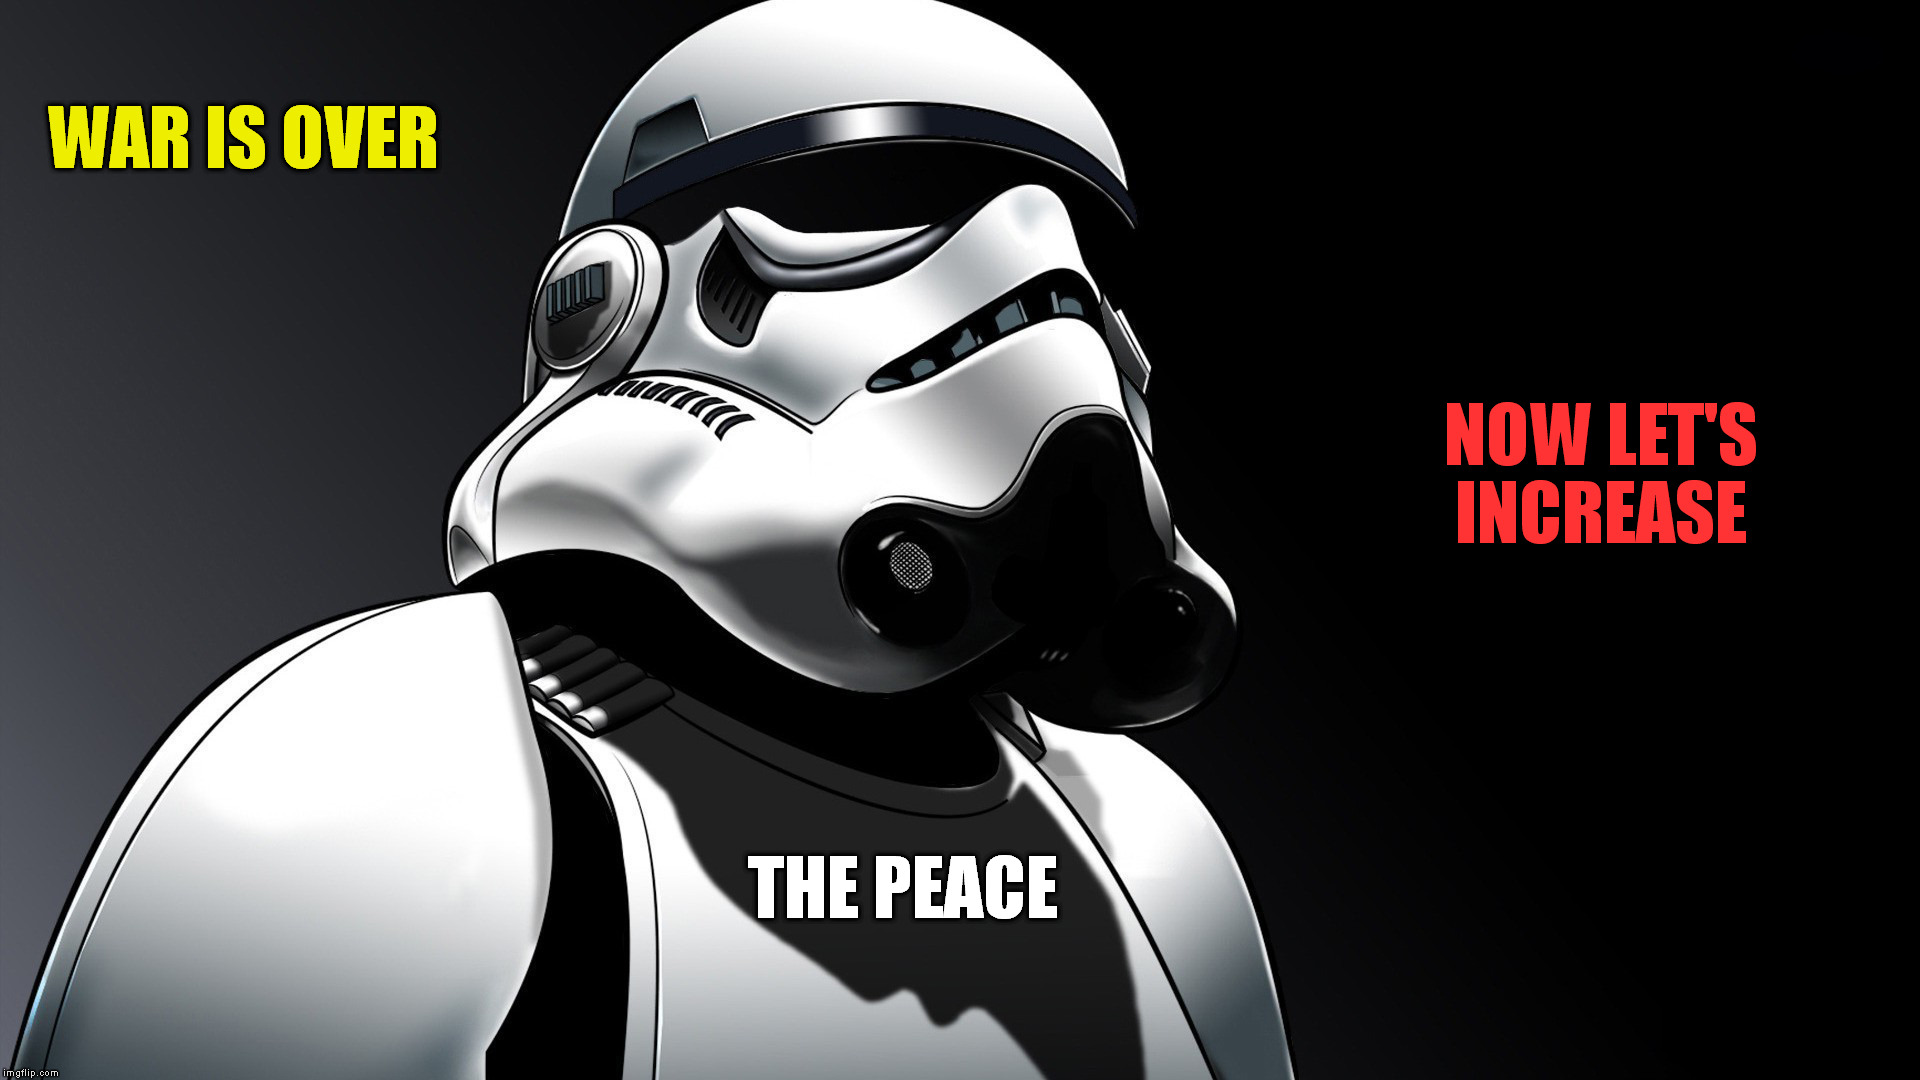 WAR IS OVER NOW LET'S INCREASE THE PEACE | image tagged in star wars,stormtrooper,alabama3,war,peace | made w/ Imgflip meme maker